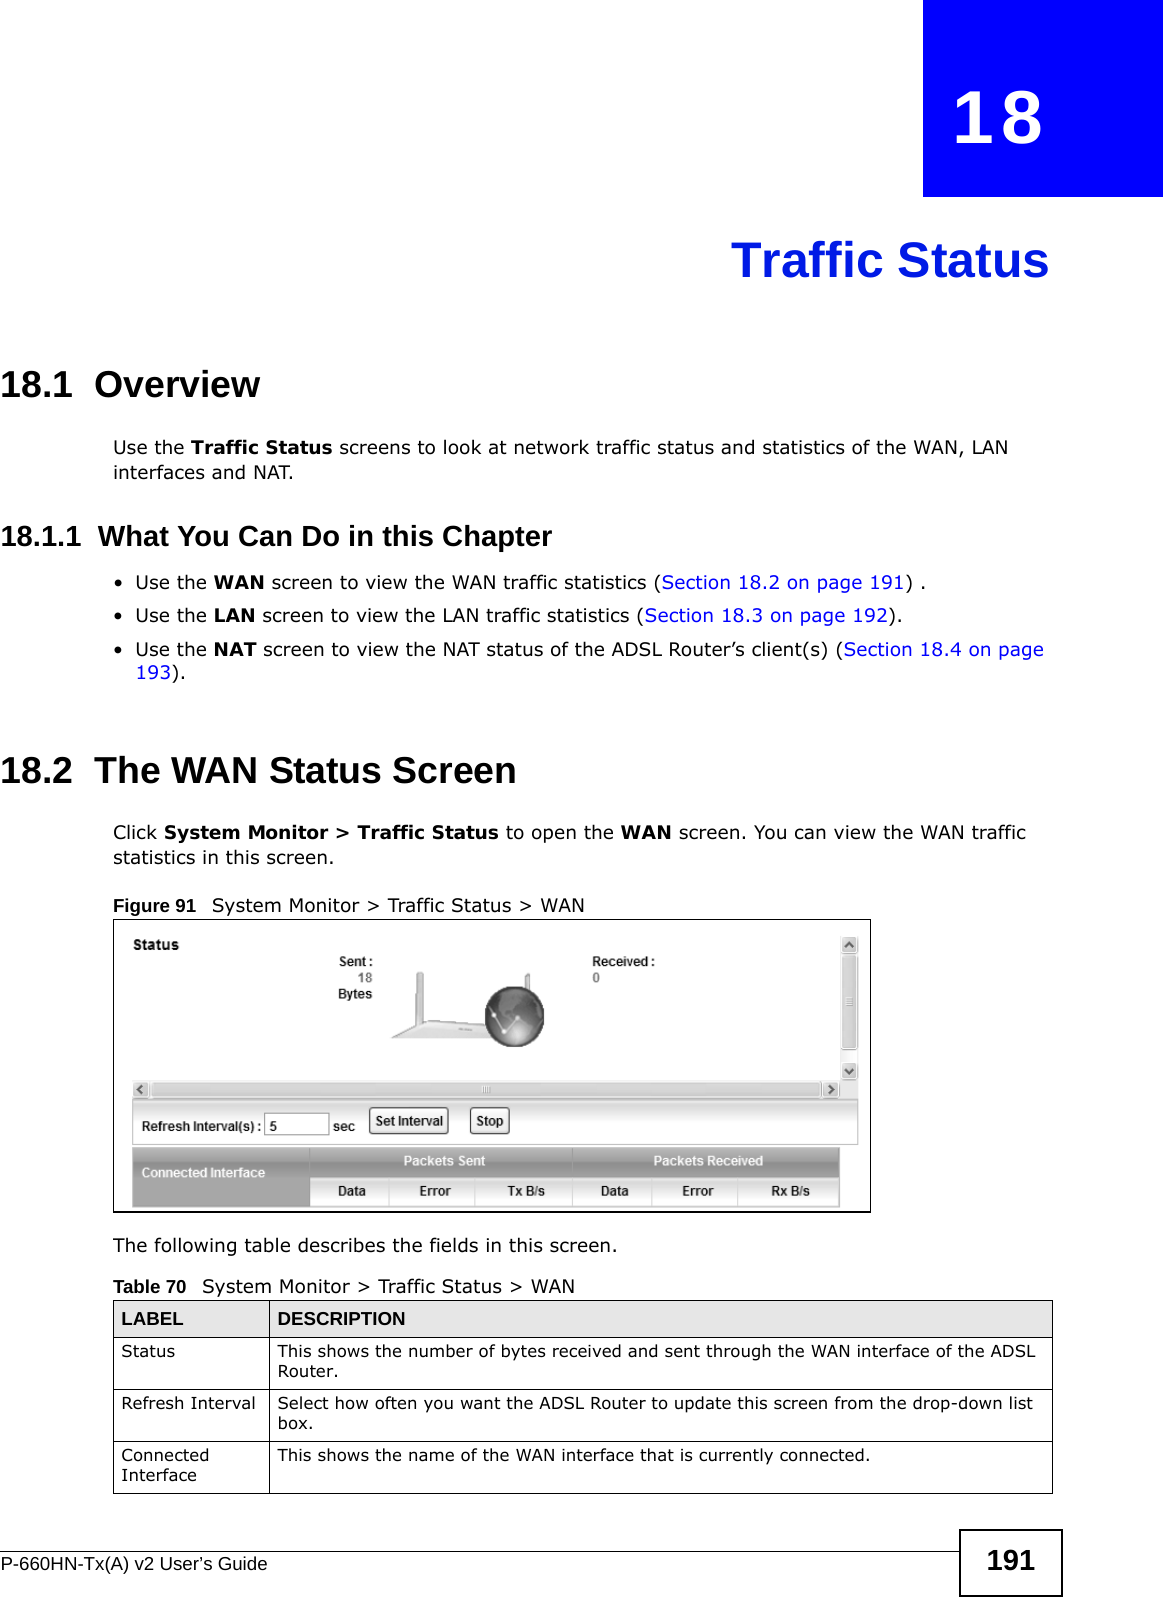 P-660HN-Tx(A) v2 User’s Guide 191CHAPTER   18Traffic Status18.1  OverviewUse the Traffic Status screens to look at network traffic status and statistics of the WAN, LAN interfaces and NAT. 18.1.1  What You Can Do in this Chapter•Use the WAN screen to view the WAN traffic statistics (Section 18.2 on page 191) .•Use the LAN screen to view the LAN traffic statistics (Section 18.3 on page 192).•Use the NAT screen to view the NAT status of the ADSL Router’s client(s) (Section 18.4 on page 193).18.2  The WAN Status Screen Click System Monitor &gt; Traffic Status to open the WAN screen. You can view the WAN traffic statistics in this screen.Figure 91   System Monitor &gt; Traffic Status &gt; WANThe following table describes the fields in this screen.   Table 70   System Monitor &gt; Traffic Status &gt; WANLABEL DESCRIPTIONStatus This shows the number of bytes received and sent through the WAN interface of the ADSL Router.Refresh Interval Select how often you want the ADSL Router to update this screen from the drop-down list box.Connected Interface This shows the name of the WAN interface that is currently connected.